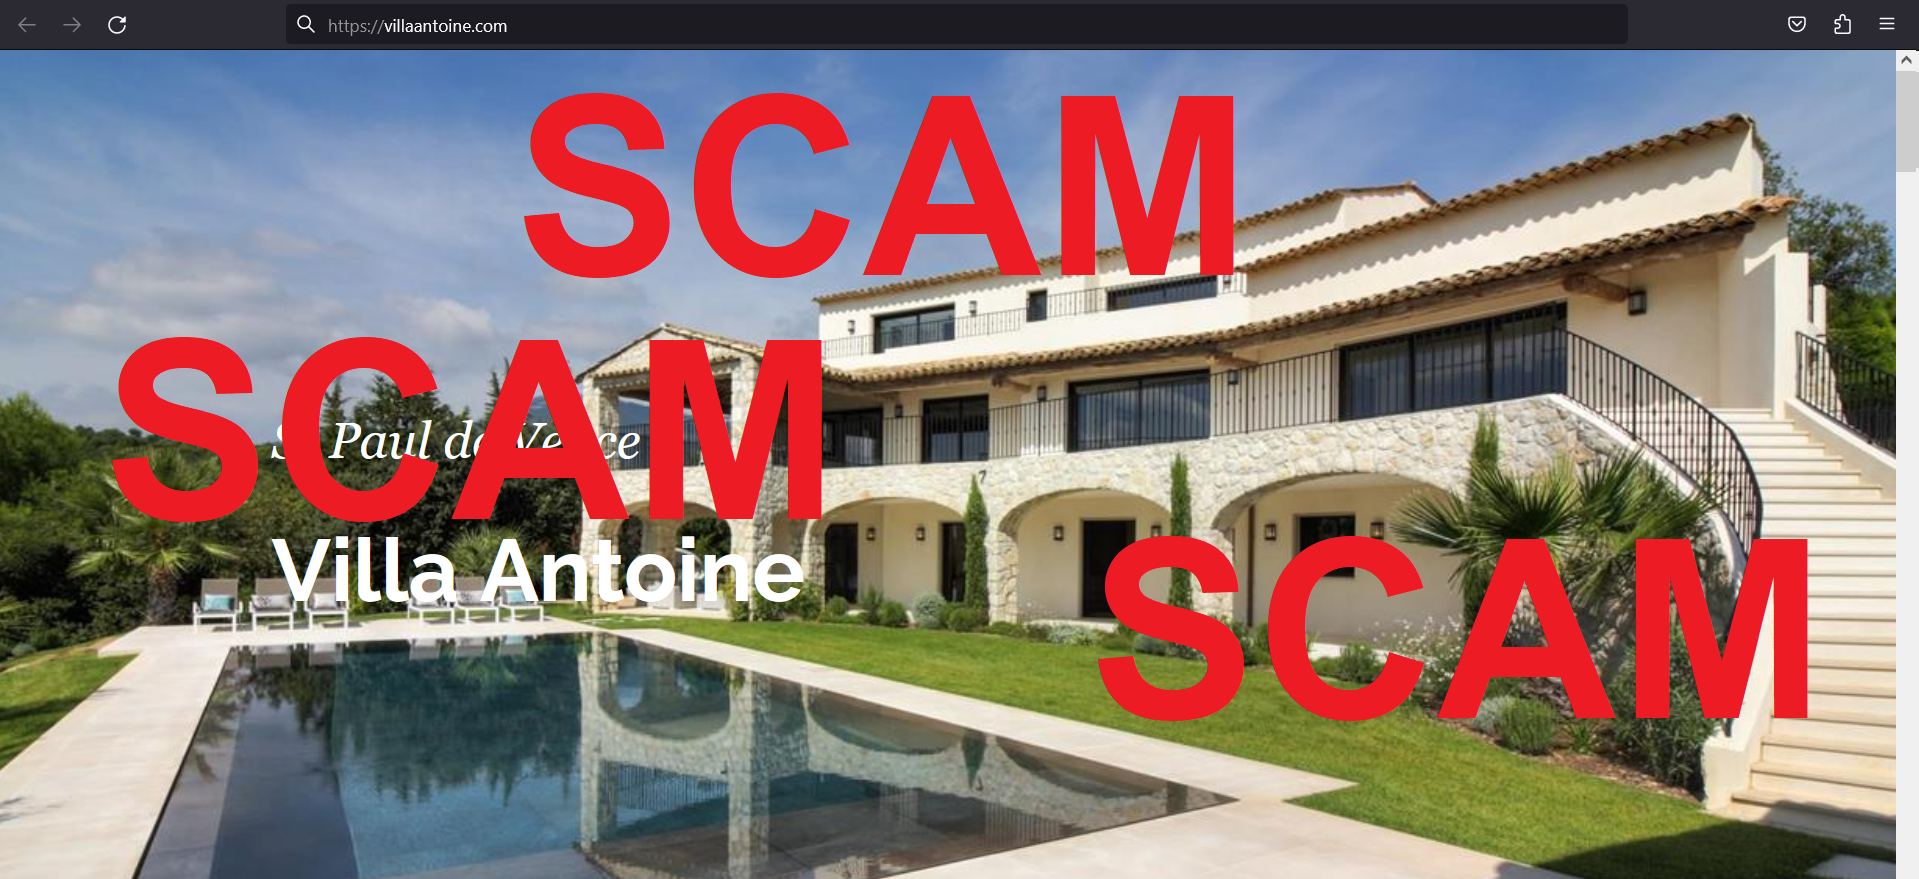 You are currently viewing Fraudulent website: villaantoine.com SCAM SCAM